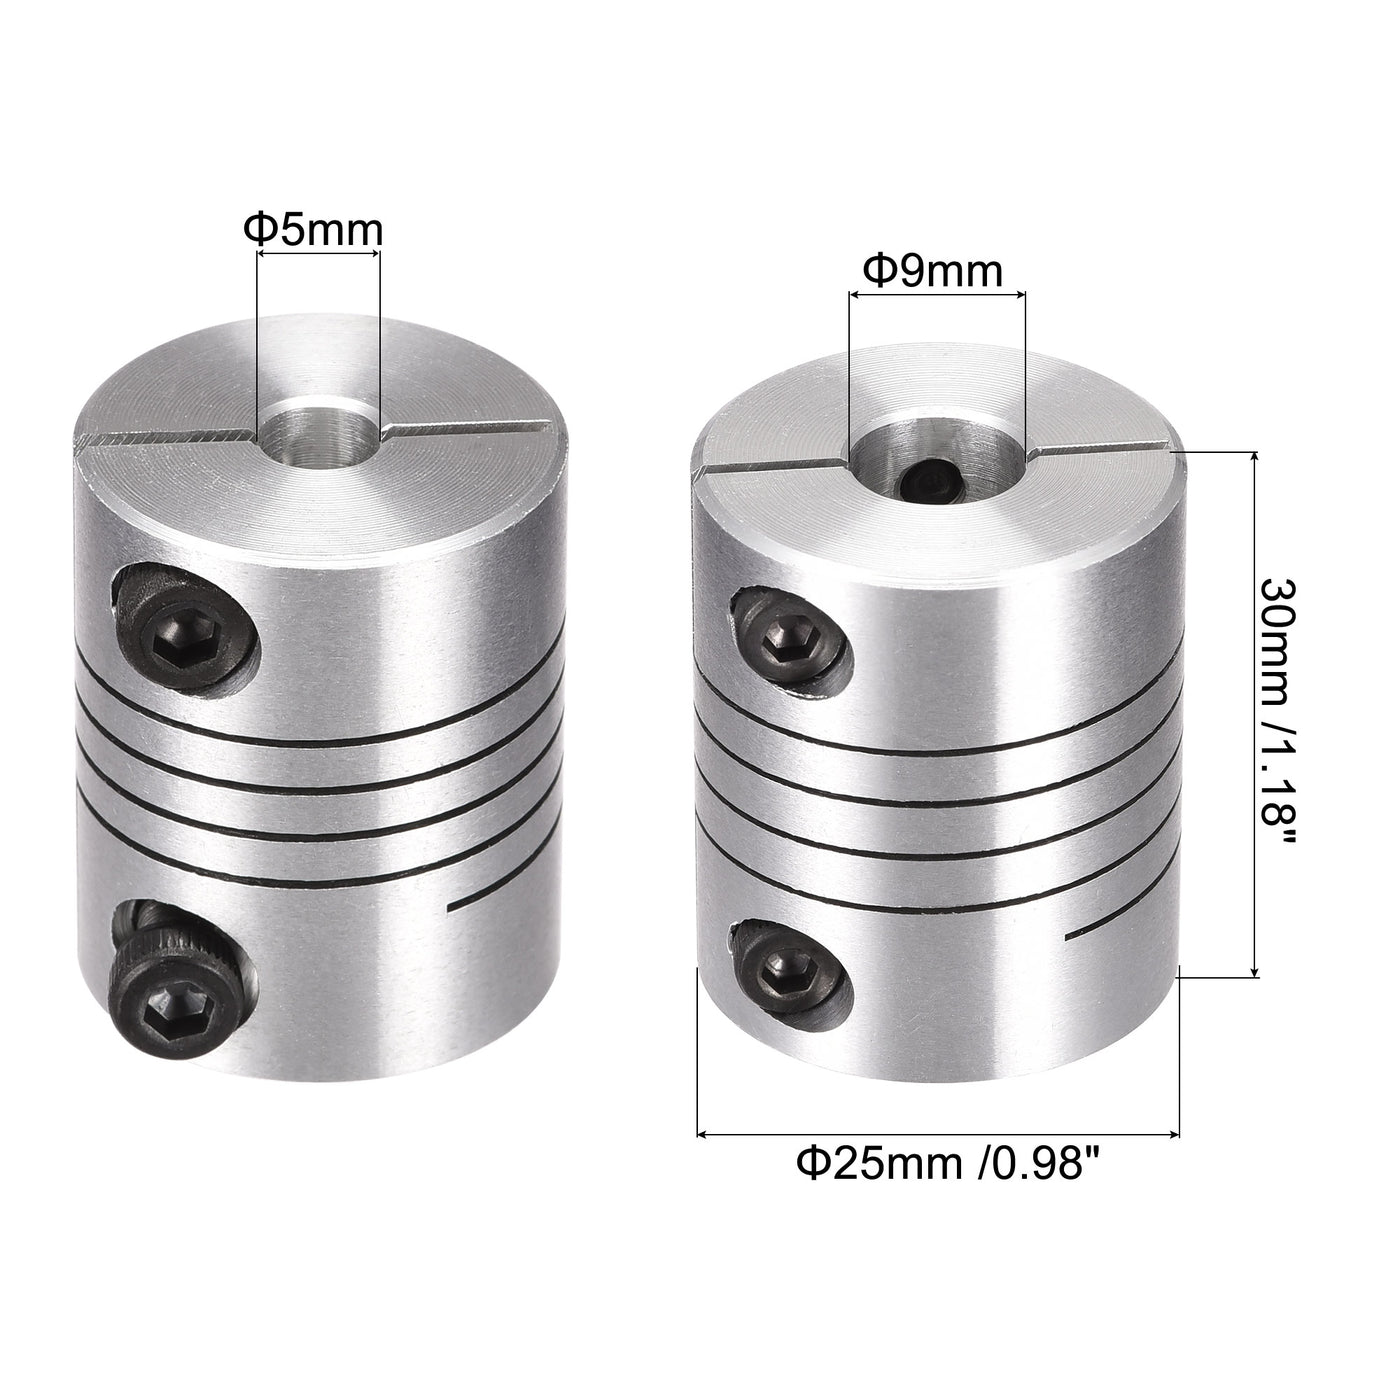 uxcell Uxcell Motor Shaft 5mm to 9mm Helical Beam Coupler Coupling 25mm Dia 30mm Length